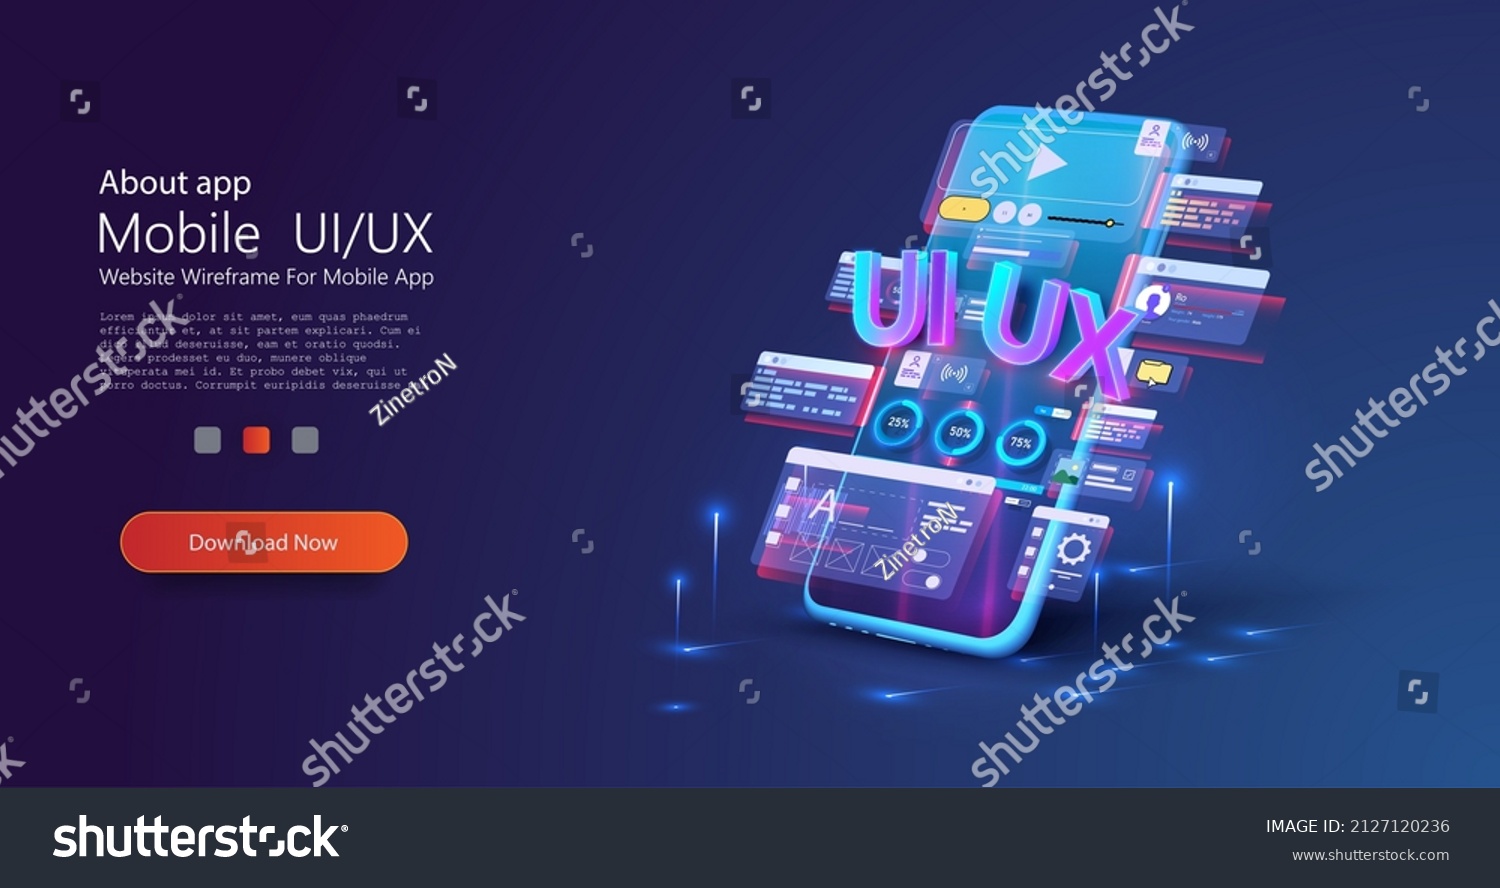 Designer, creator of an individual design of user interface scenes for a mobile UI,UX application. Blue neon design of mobile applications. Smartphone layout with active blocks and connections. Vector #2127120236